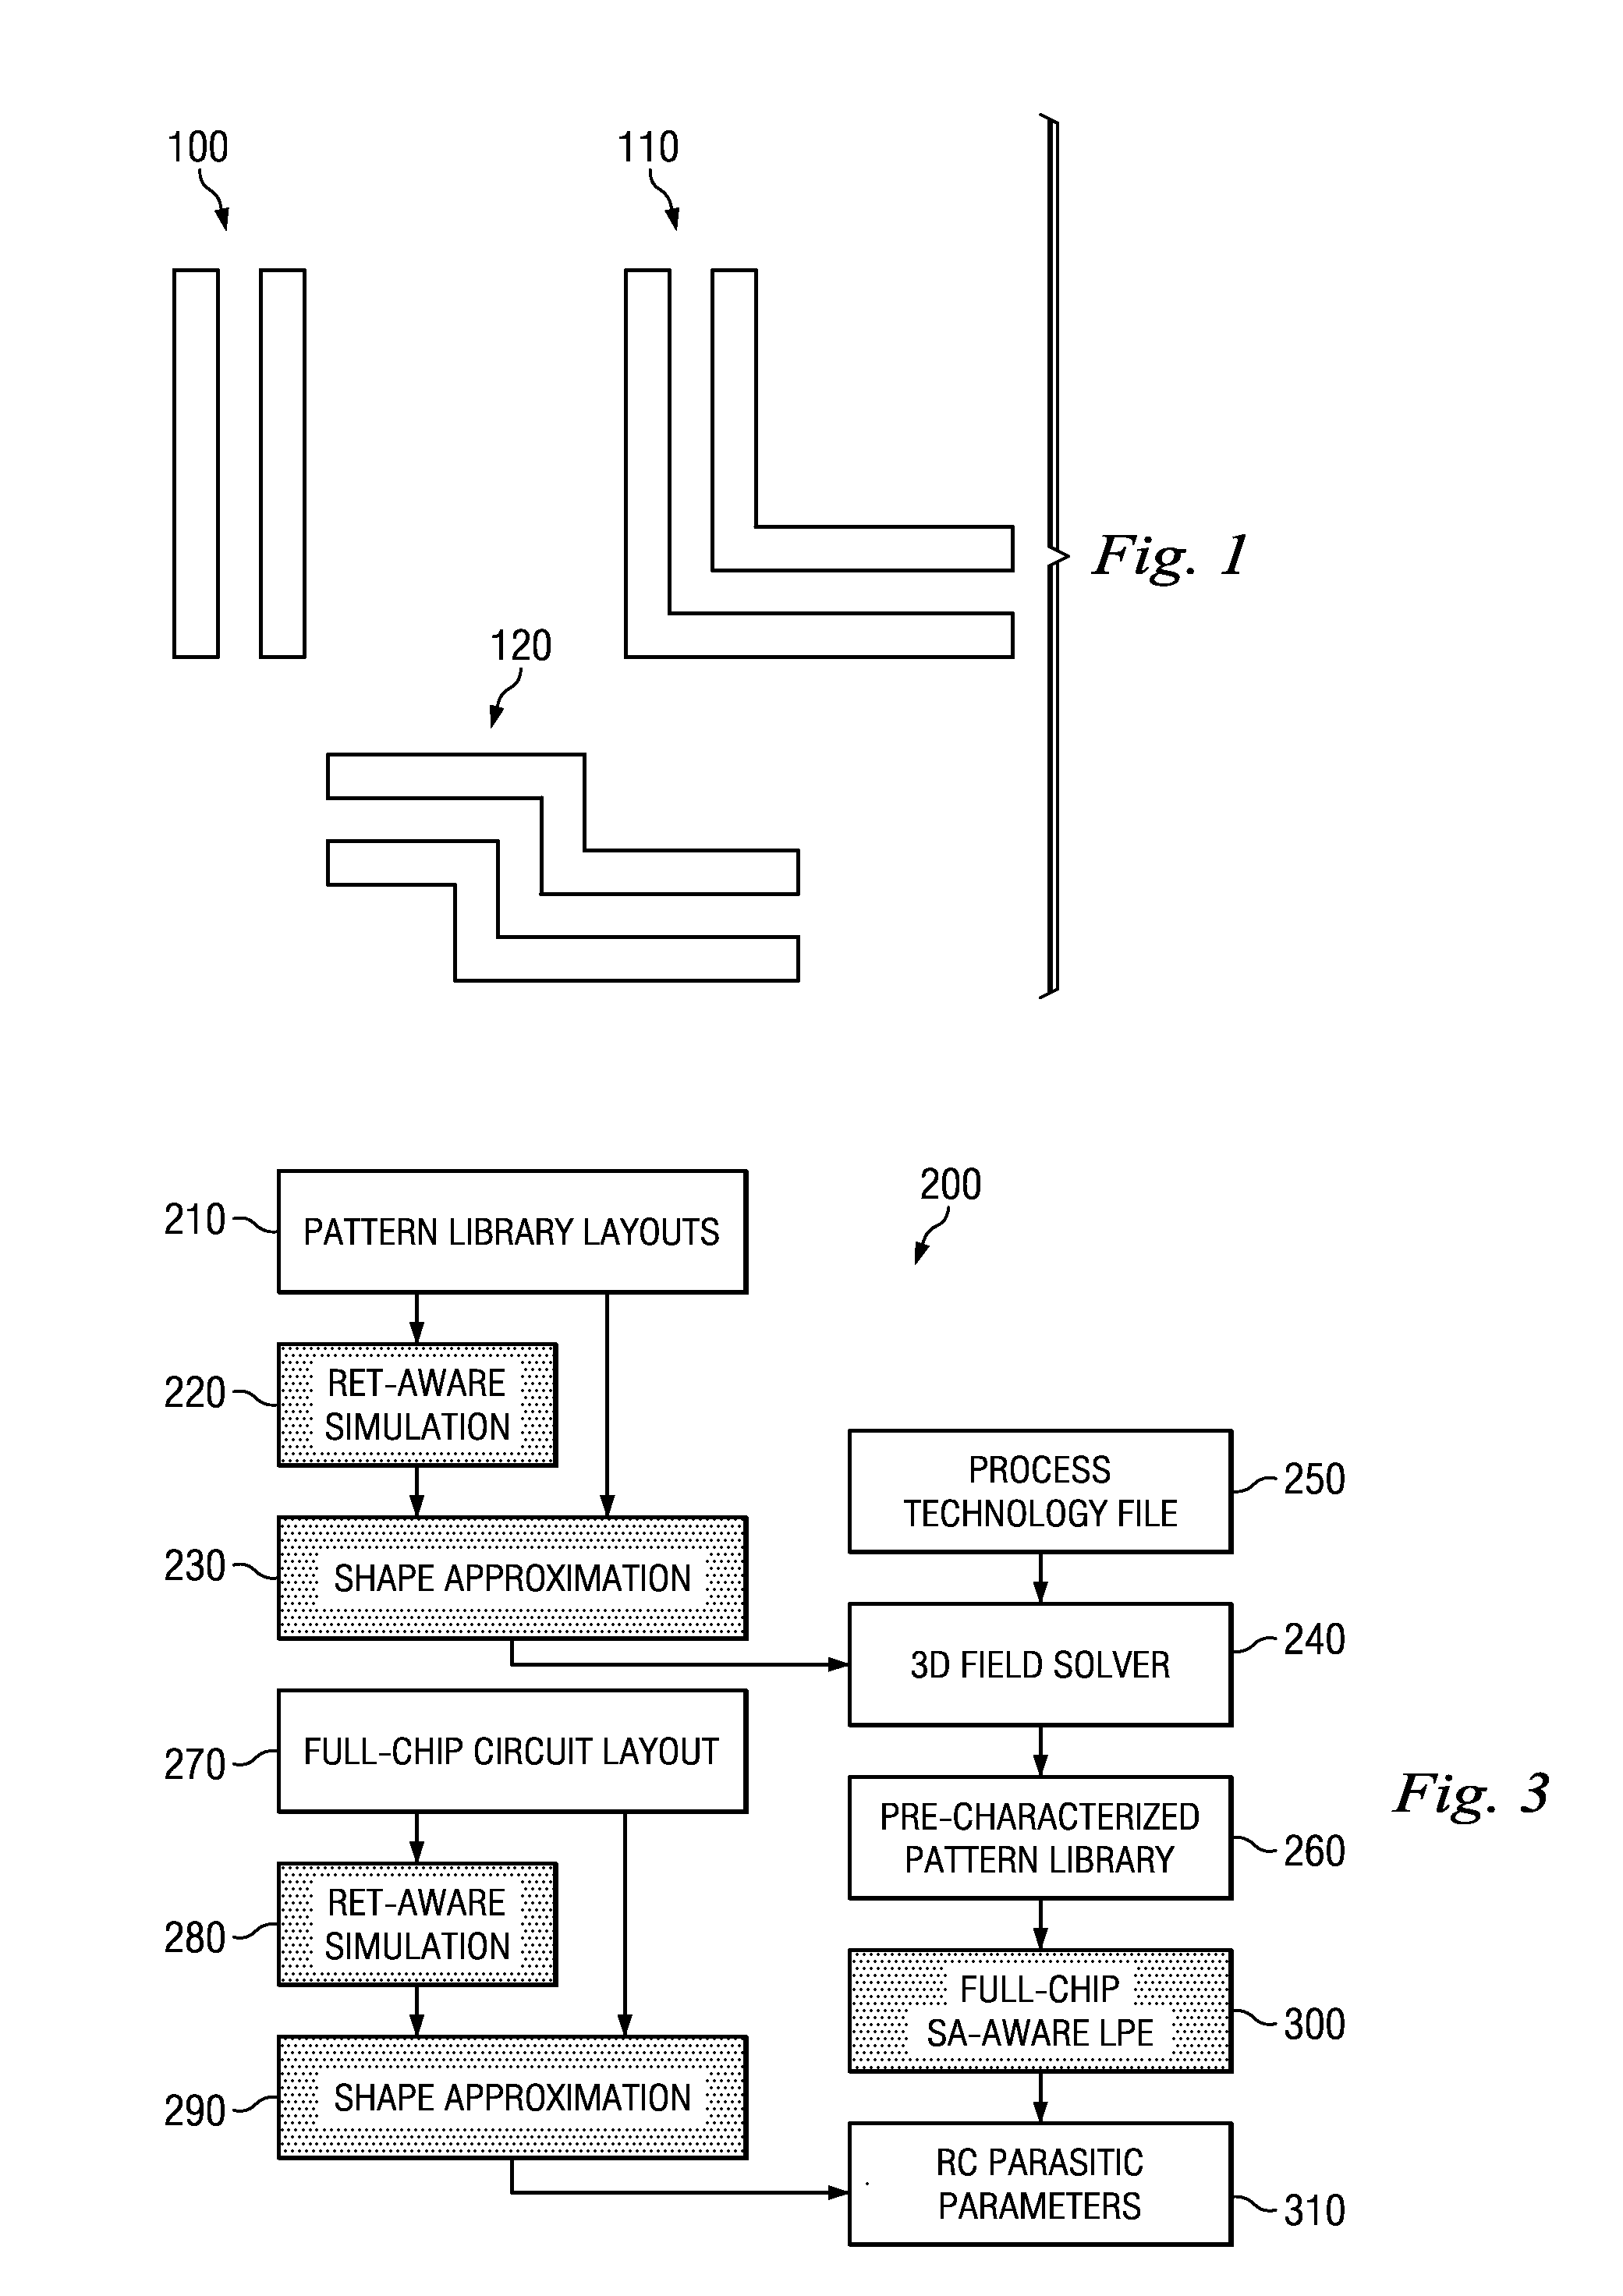 Method for improving accuracy of parasitics extraction considering sub-wavelength lithography effects